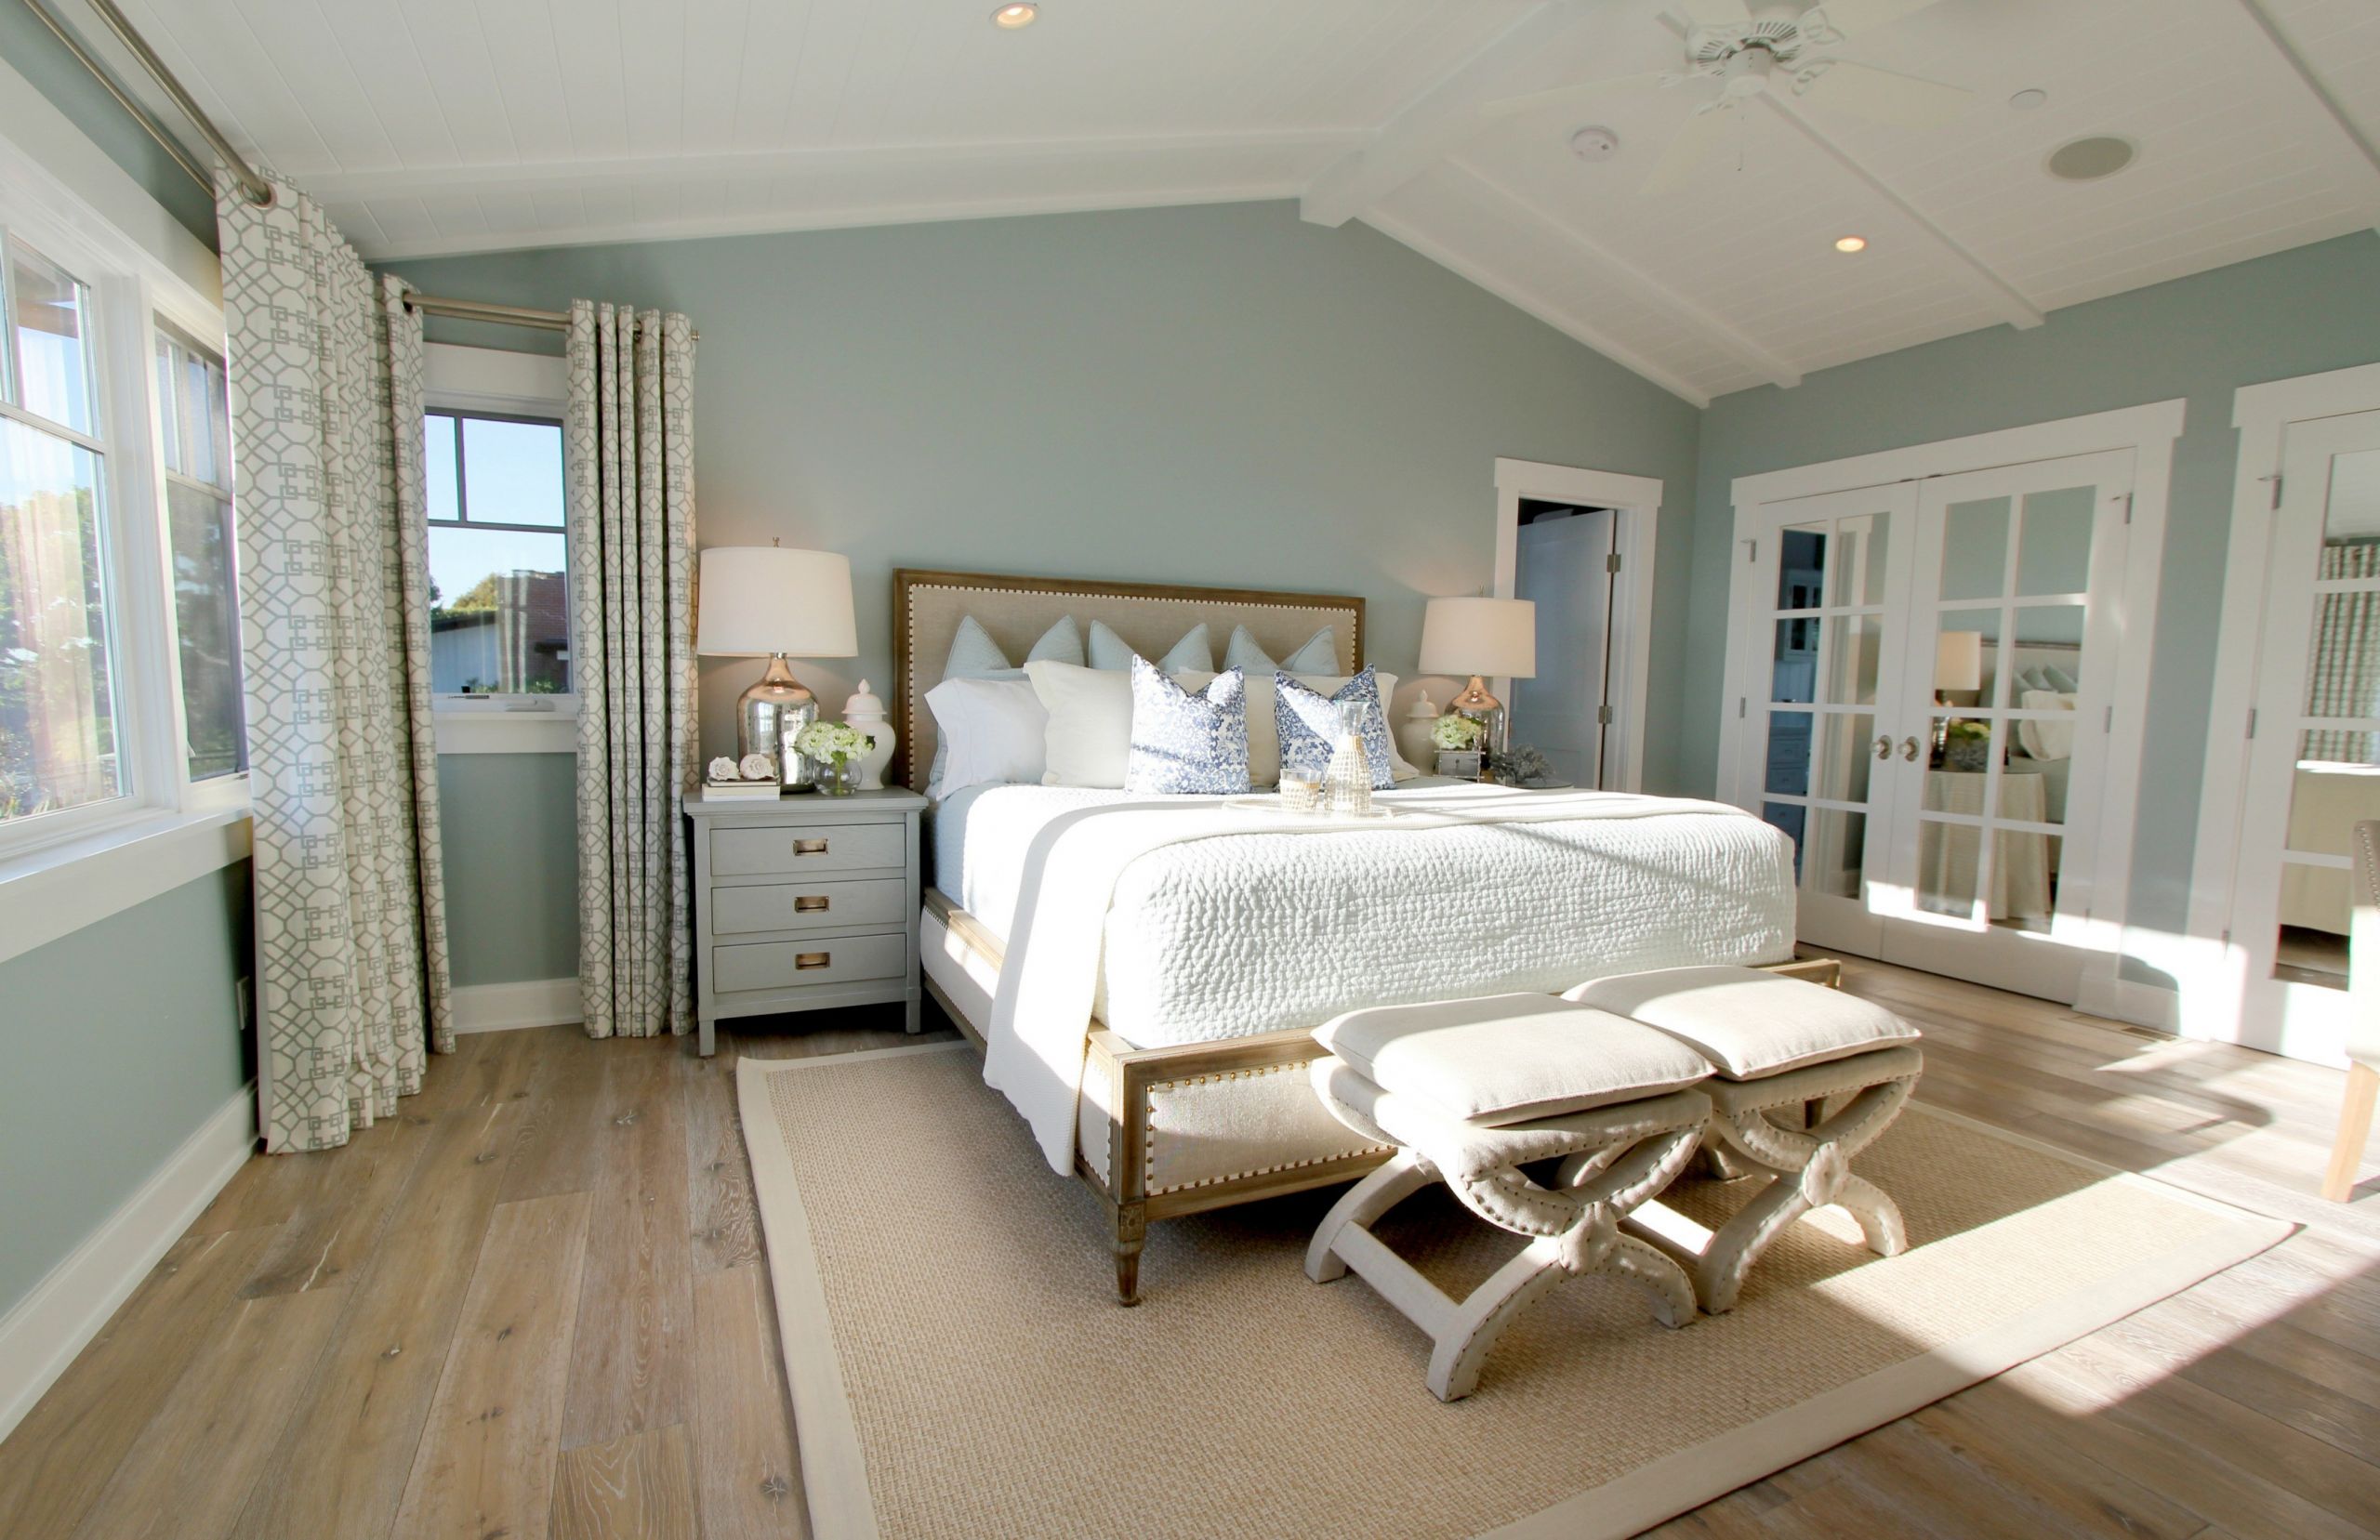 Trending Paint Colors For Bedrooms
 Bedroom Paint Color Trends for 2017